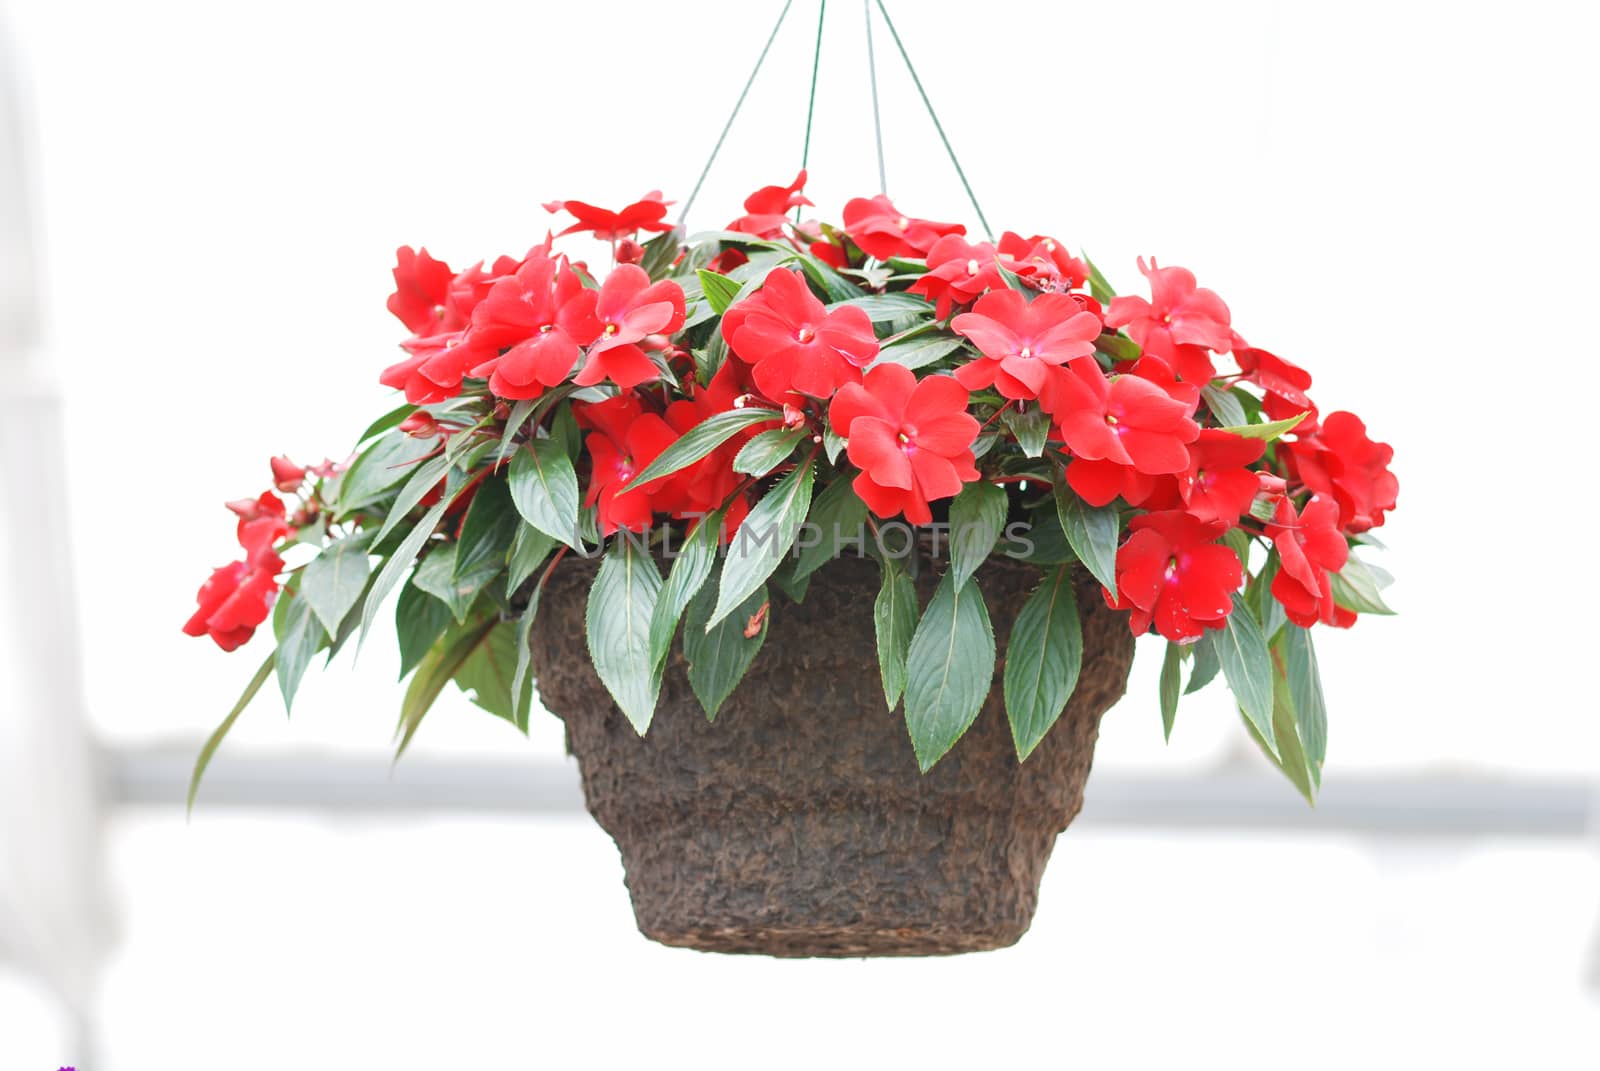 Red impatiens in potted, scientific name Impatiens walleriana flowers also called Balsam, flower bed of blossoms in white